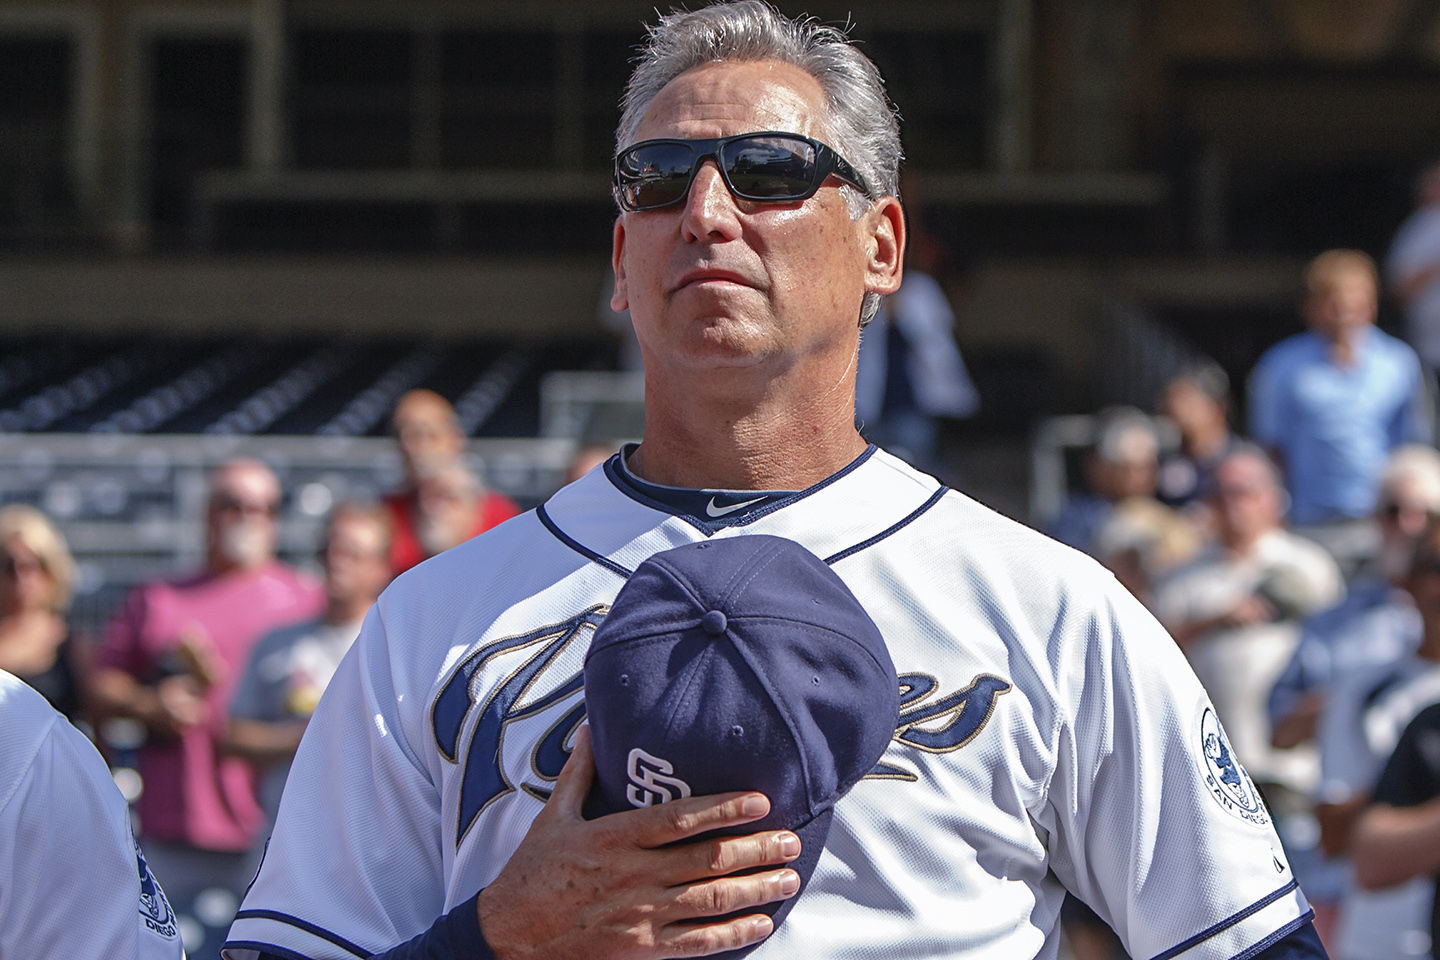 The San Diego Padres cut ties on Monday with manager Bud Black. File photo by Bill Reilly